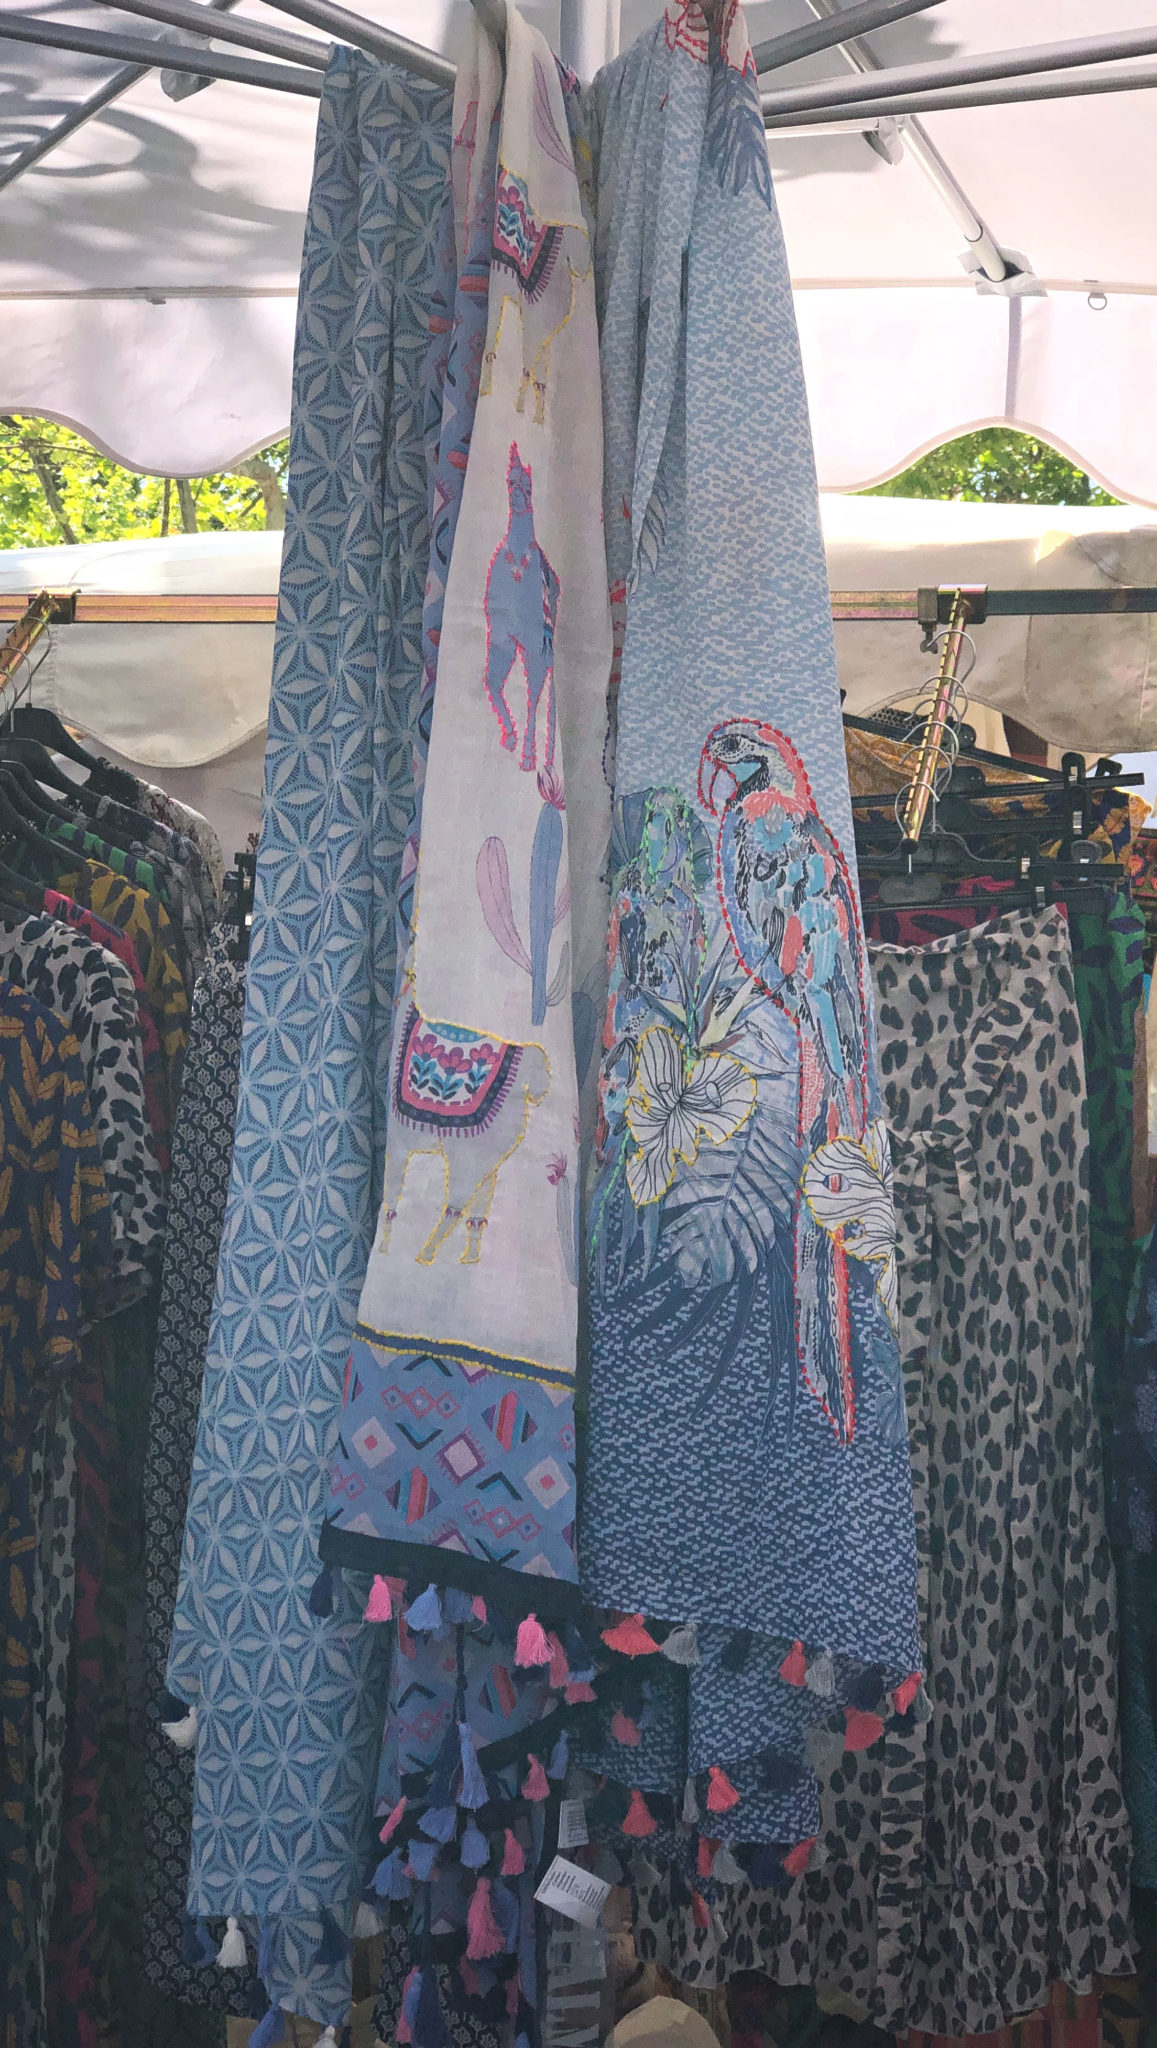 The accessories edition - St Tropez market - Chic at any age